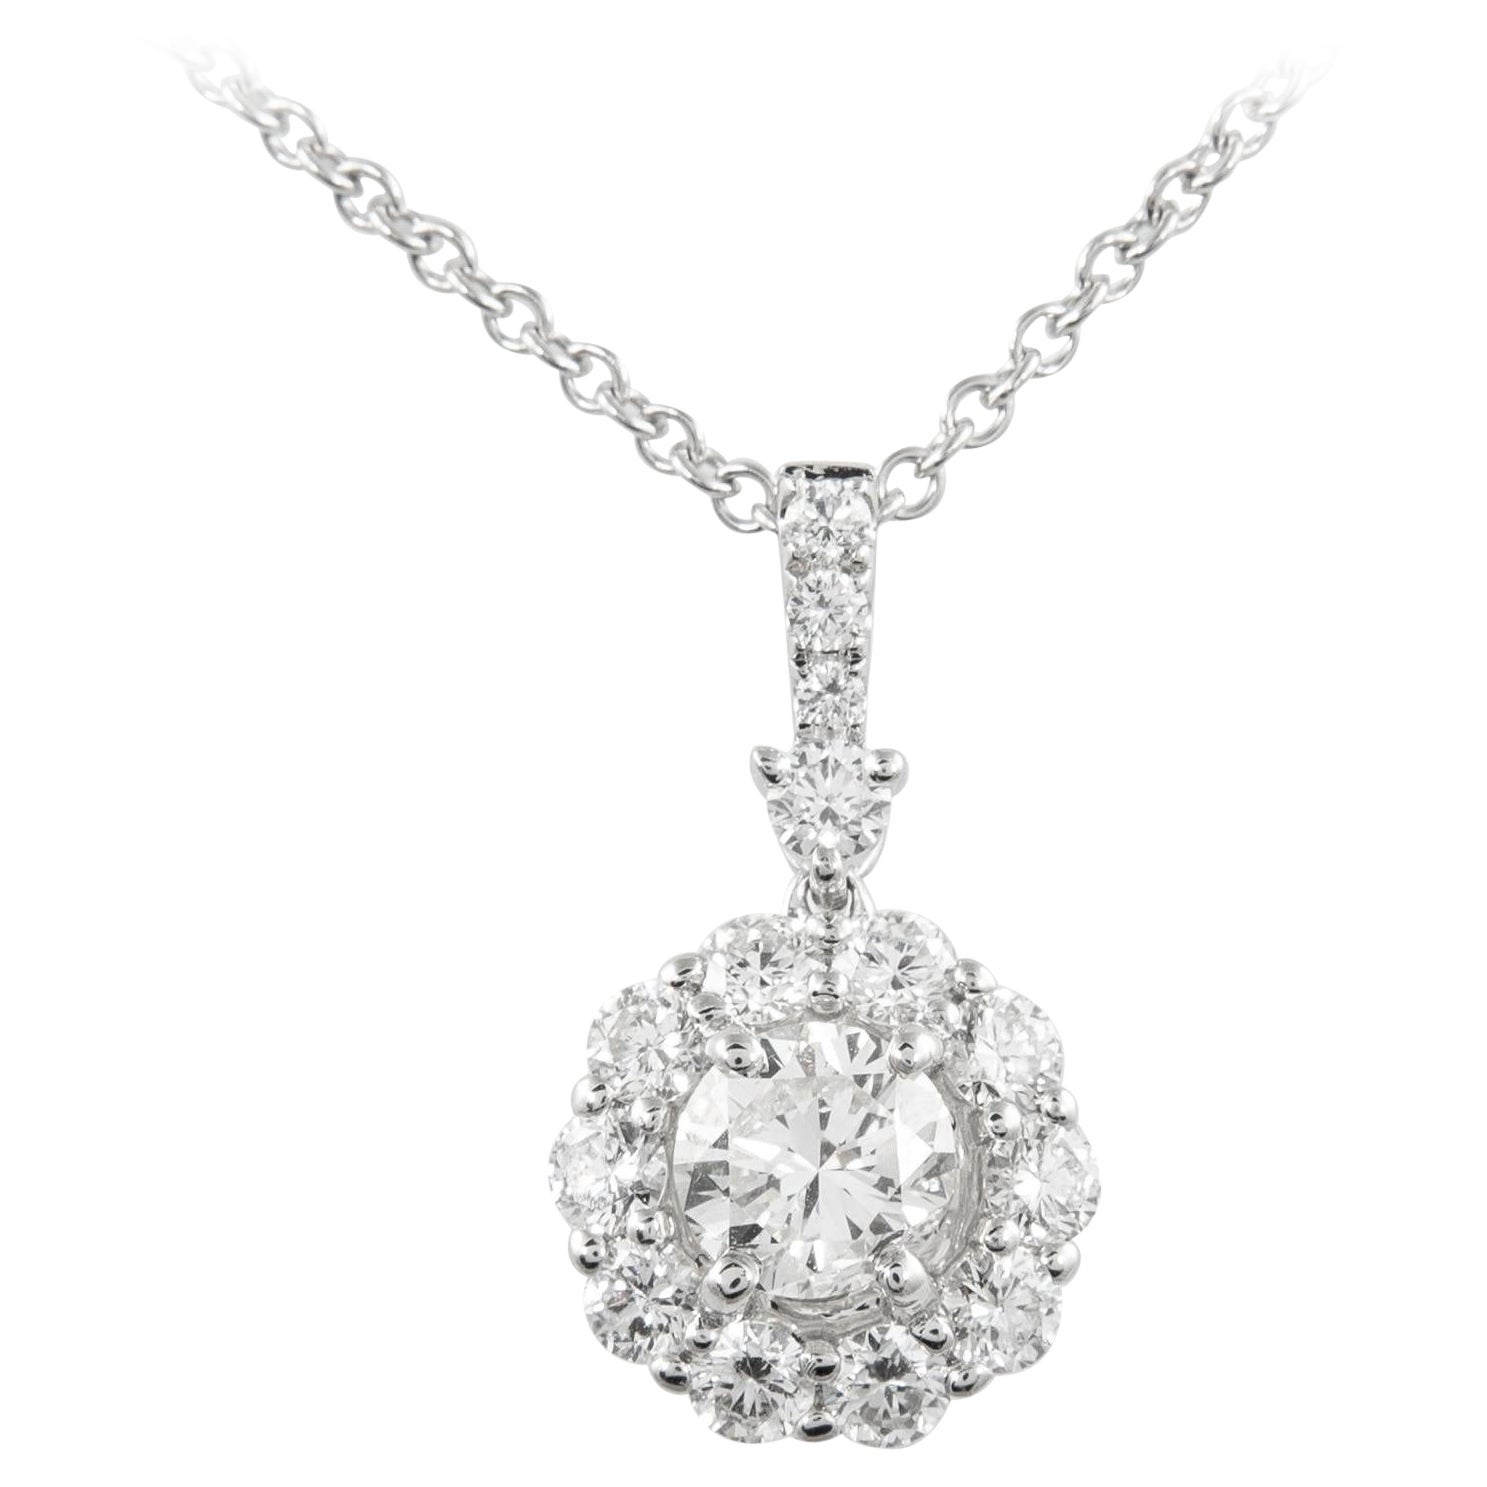 Alexander 1.88ct Round Diamond with Halo 18k White Gold Pendant Necklace For Sale